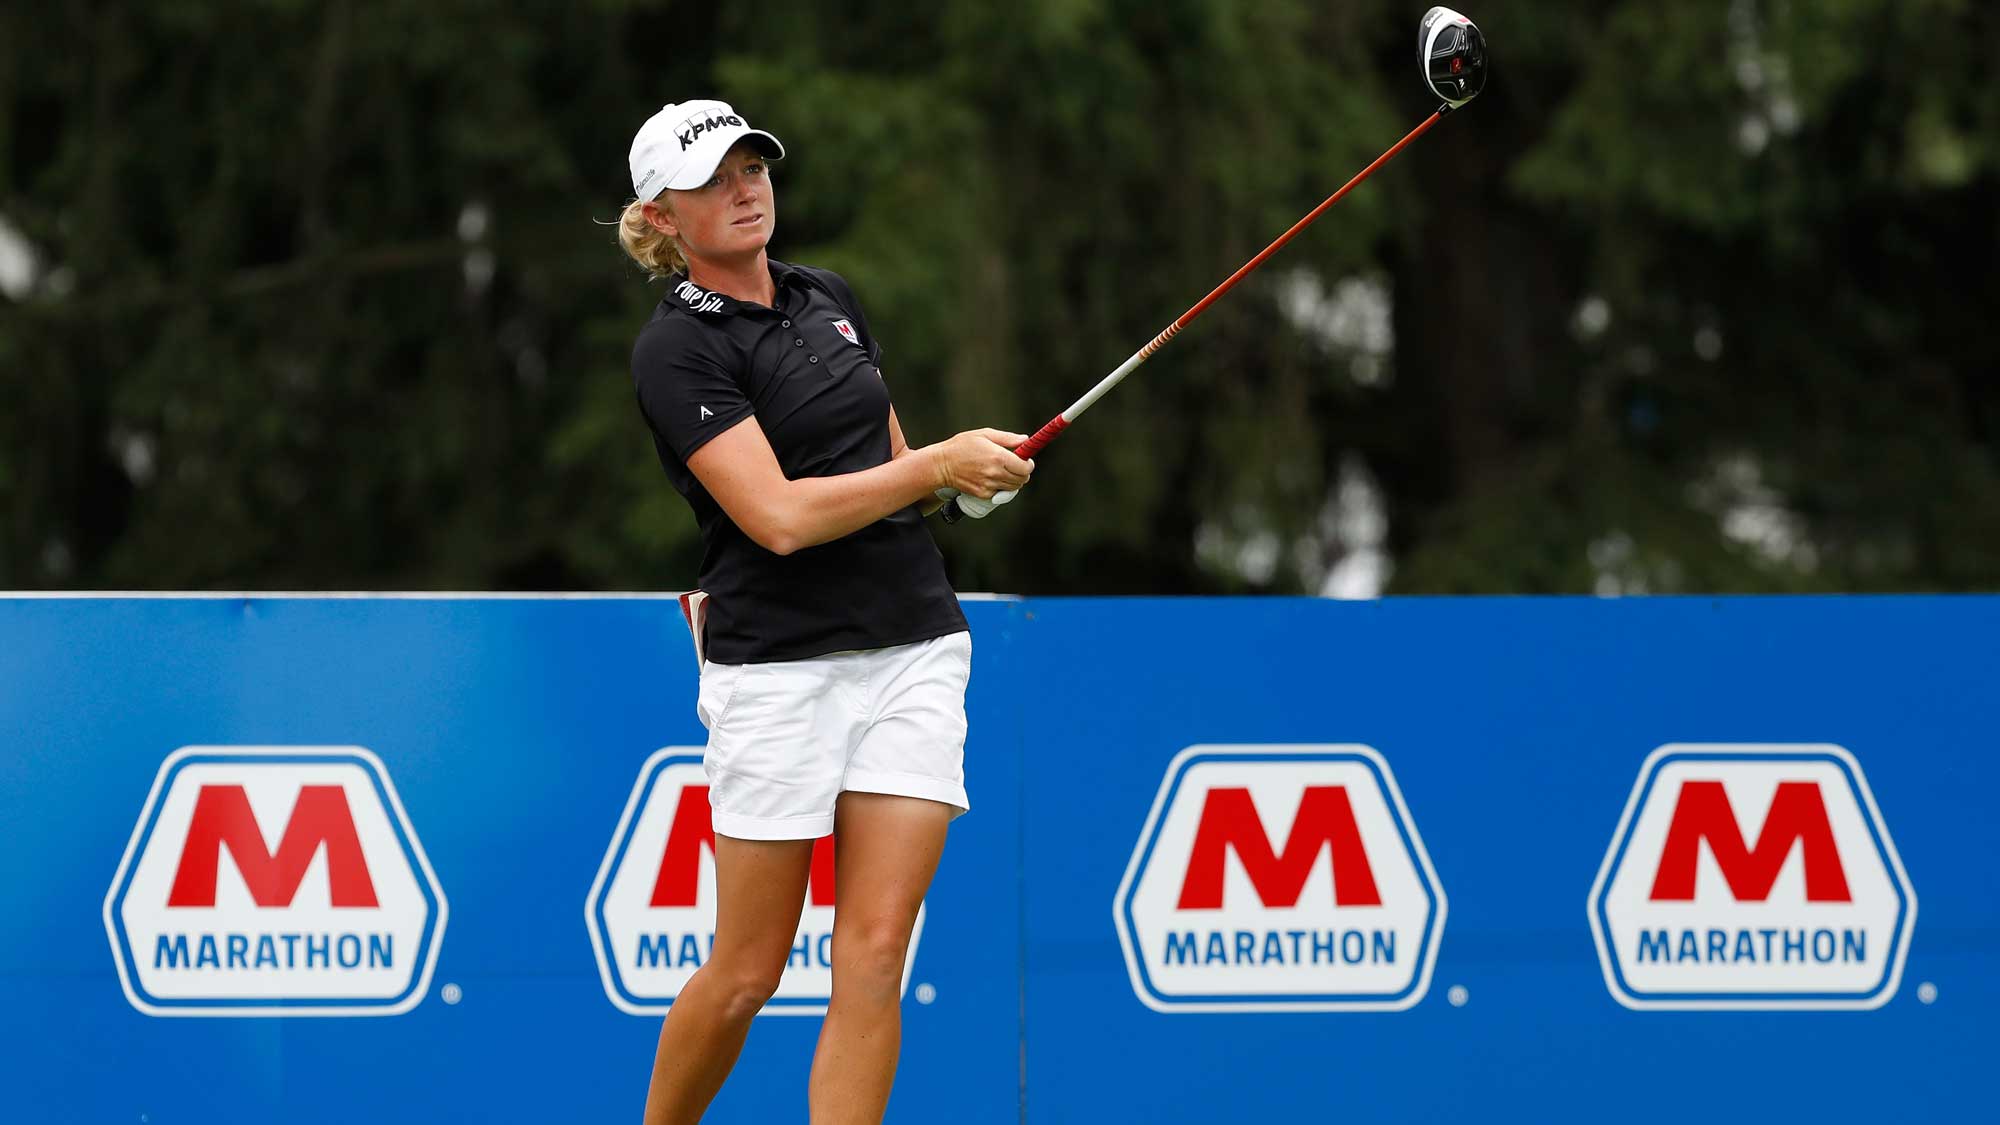 Stacy Lewis hits her drive on the 18th hole during the third round of the Marathon Classic presented by Owens Corning and O-I 